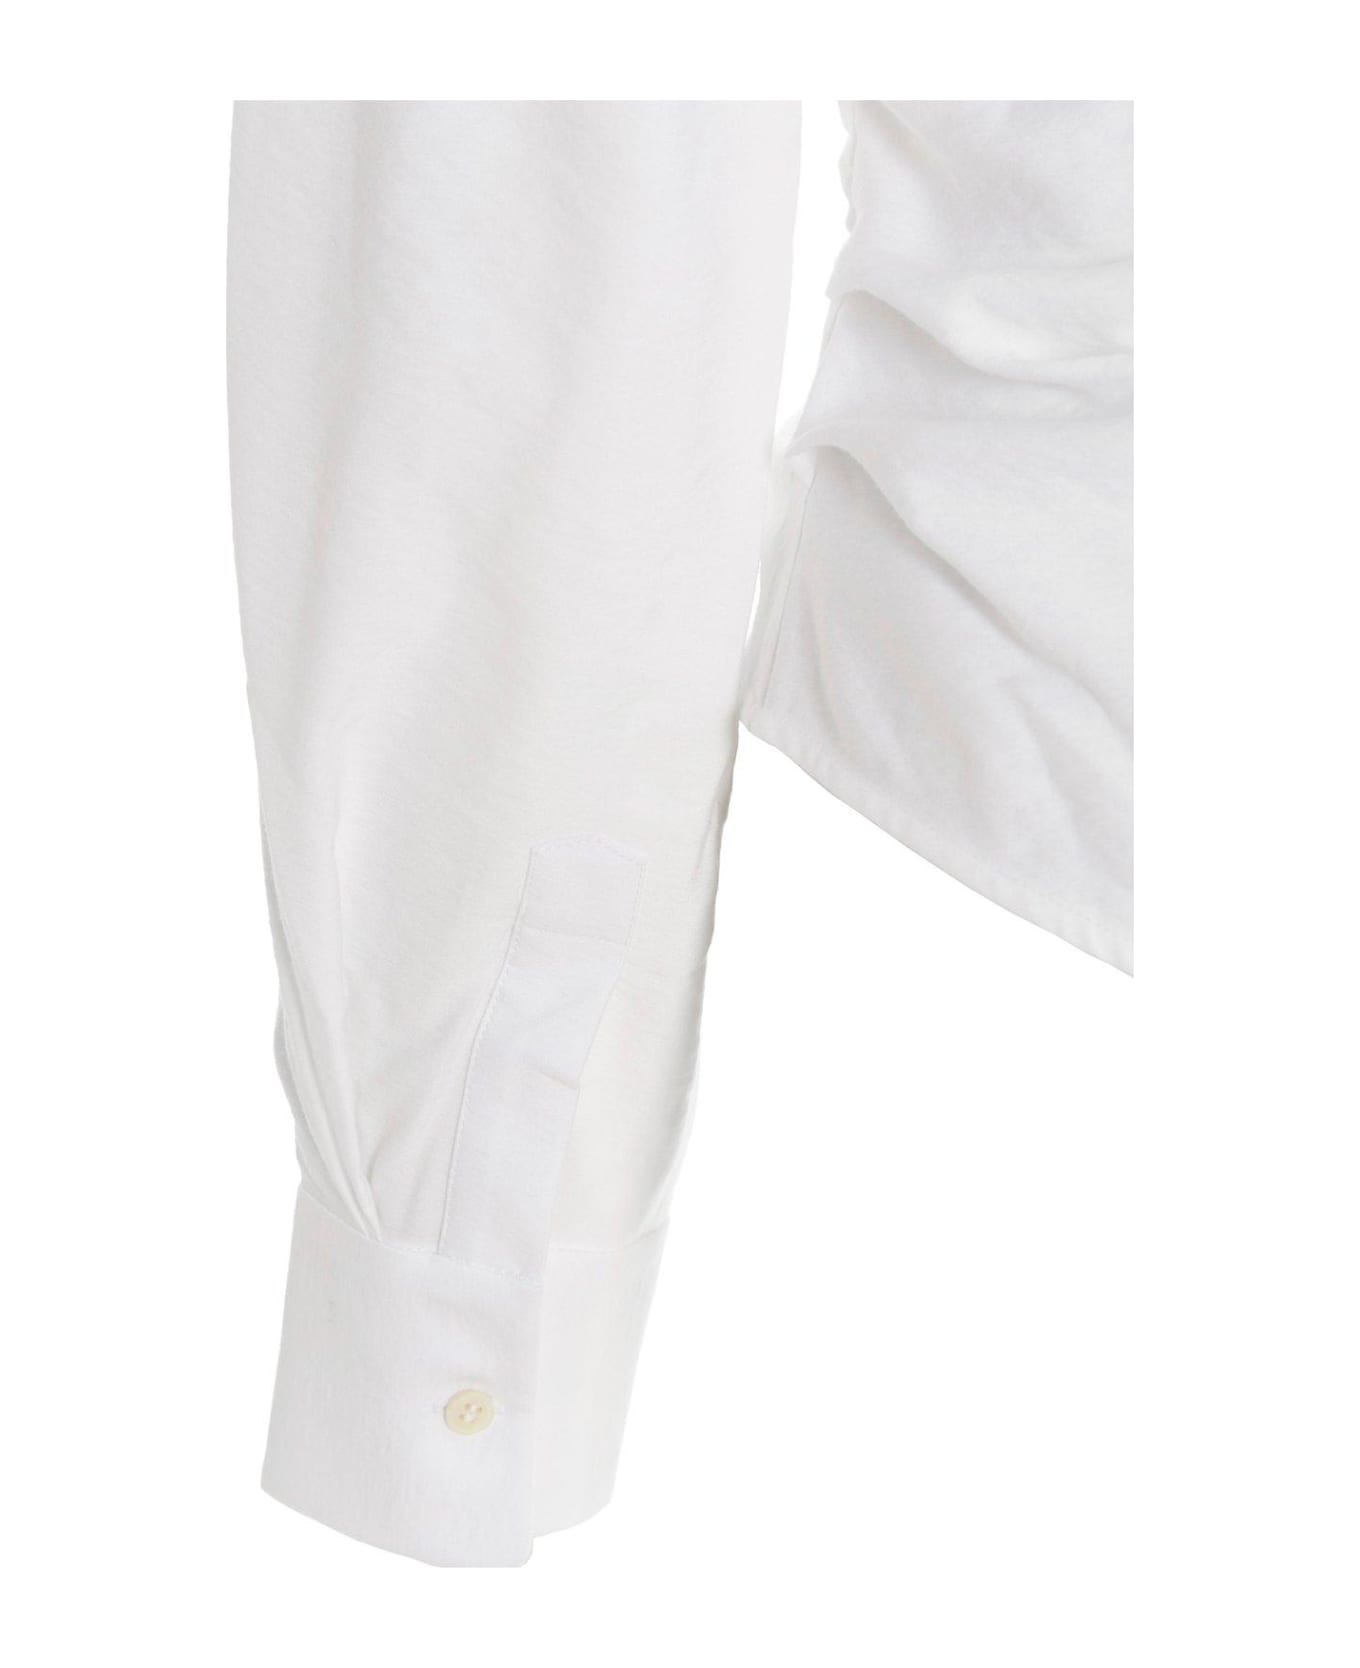 Jacquemus Bahlia Tie-up Detailed Blouse - White